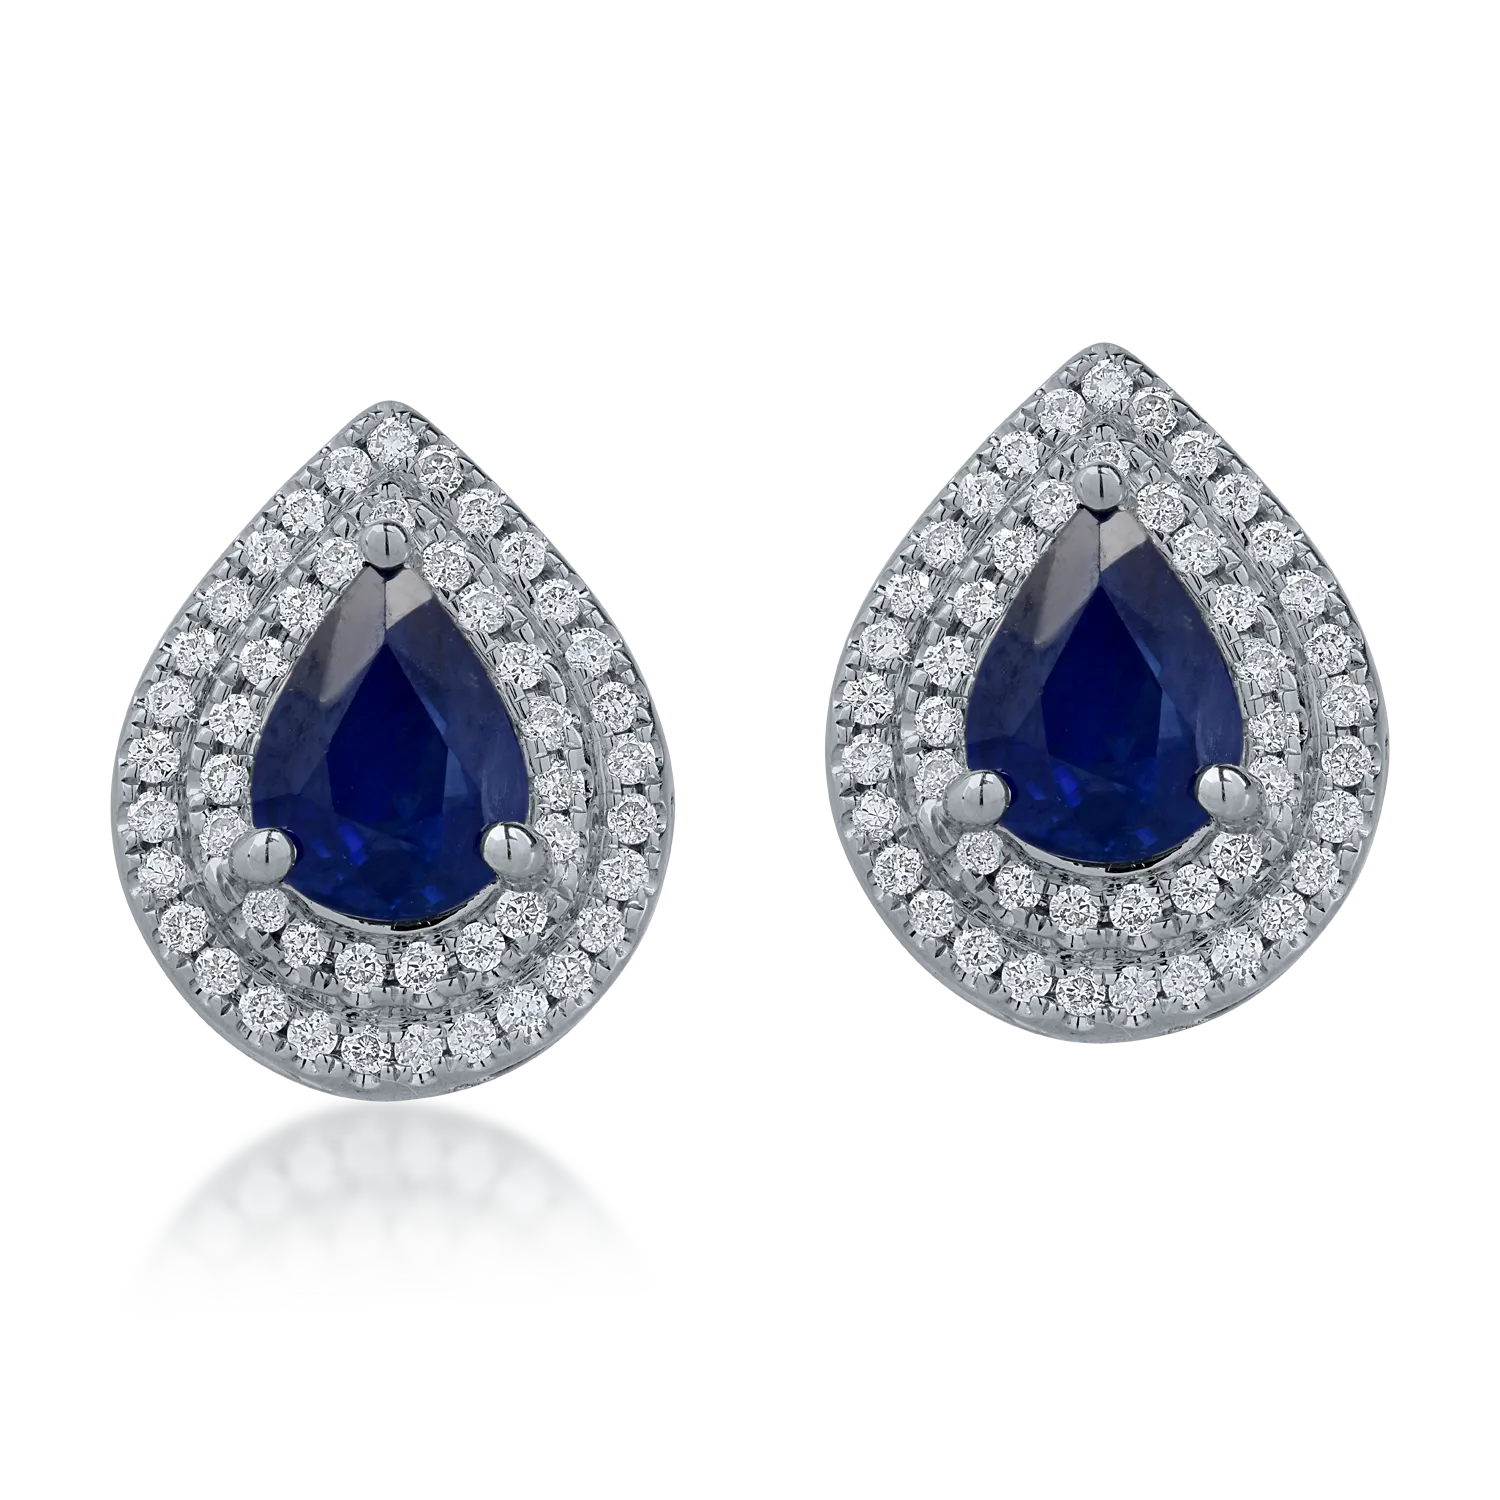 White gold earrings with 1.85ct sapphires and 0.36ct diamonds